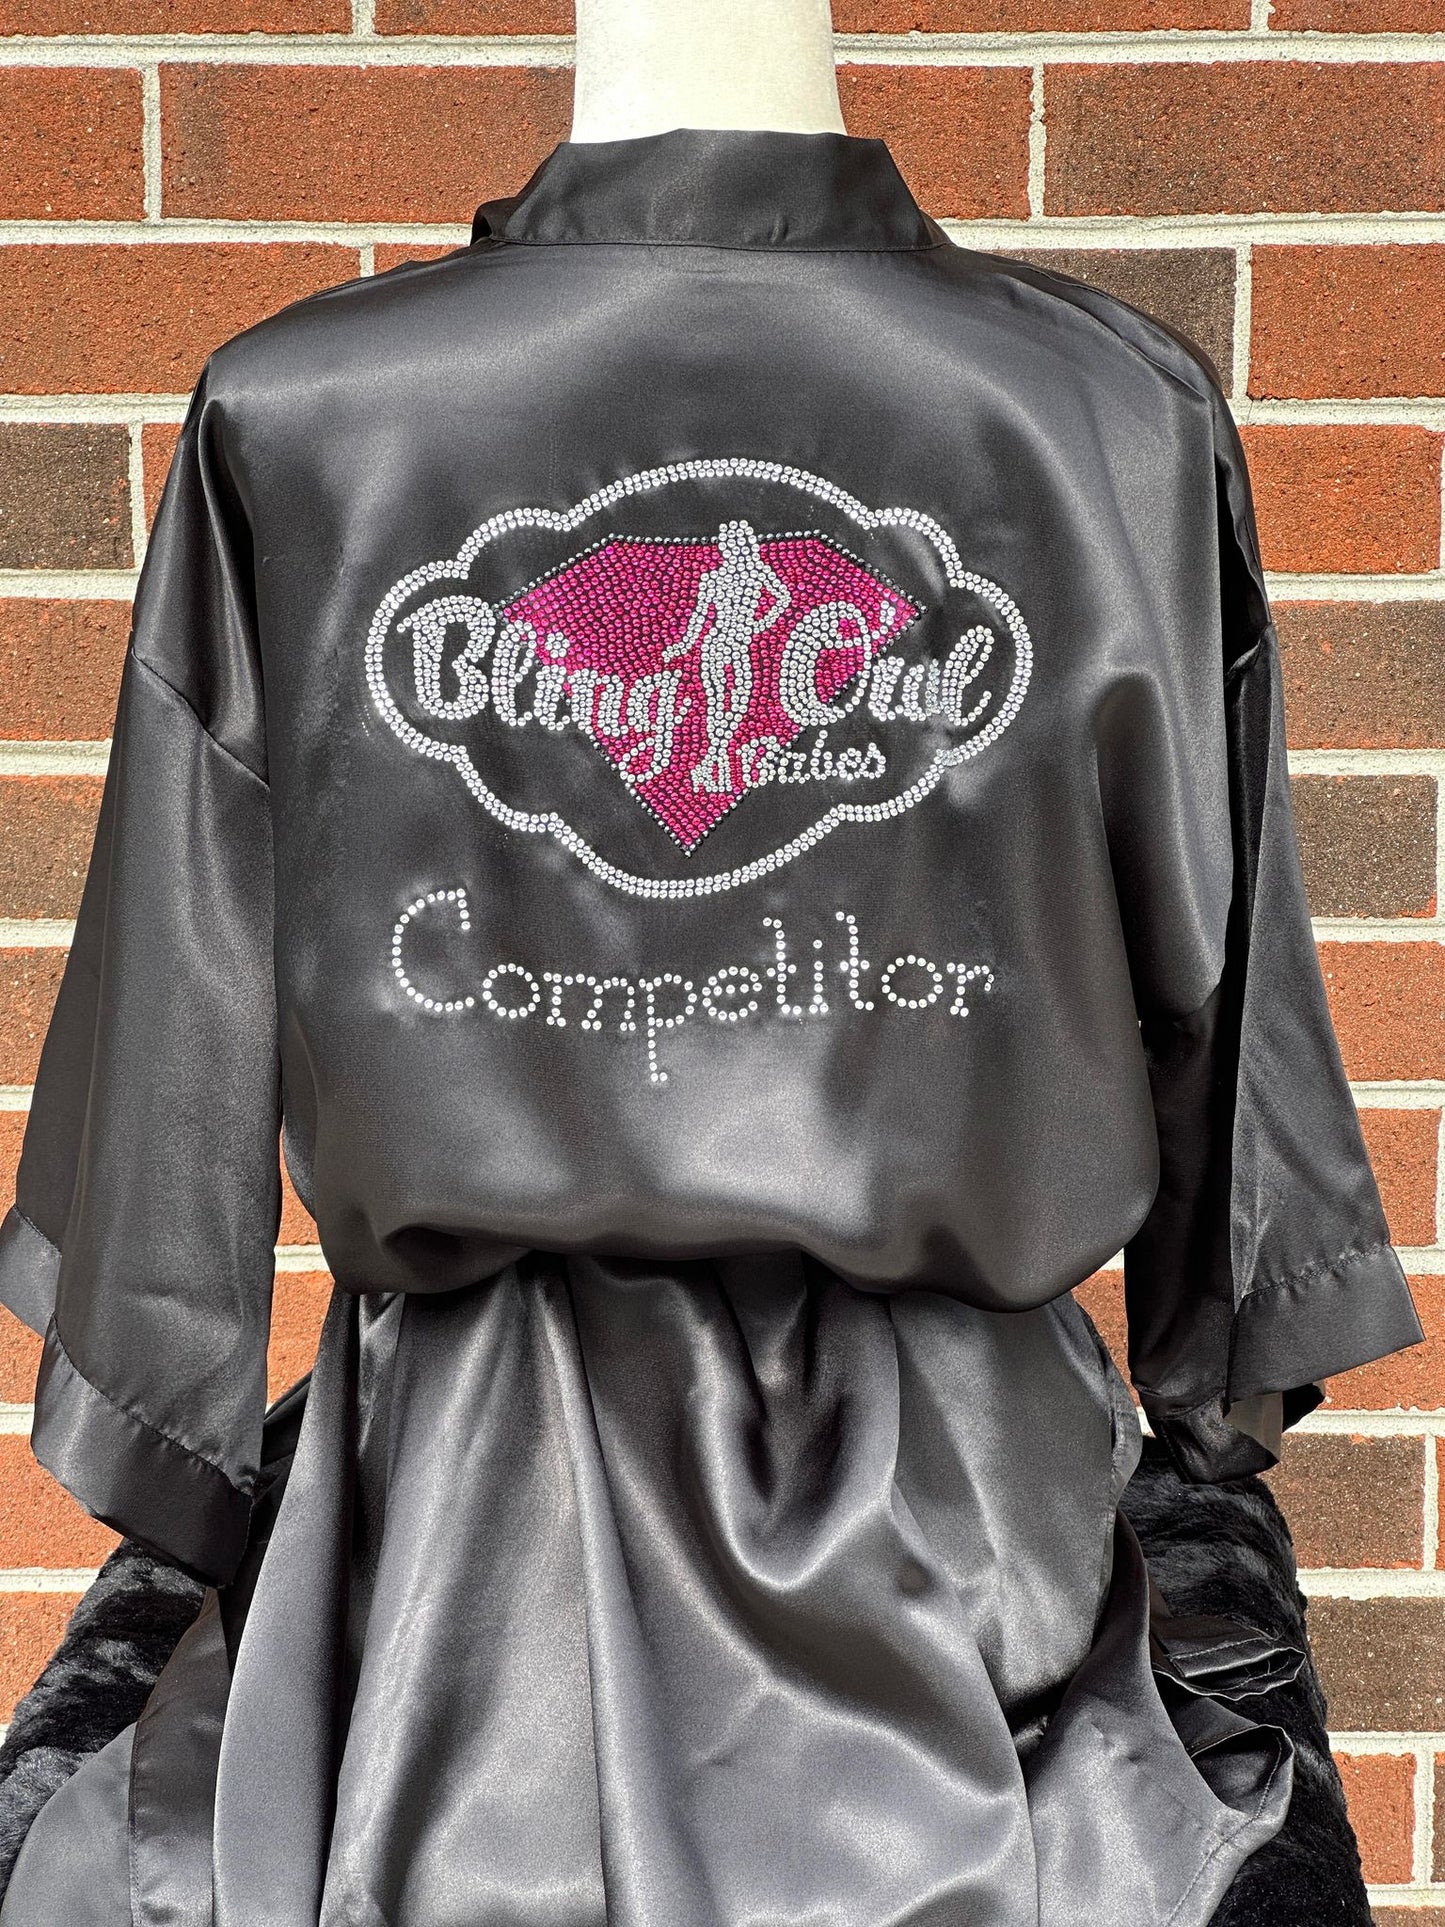 satin_robe_design_your_logo body_building_bikini_competition_cover_up personalized_customized rhinestones sparkles bling